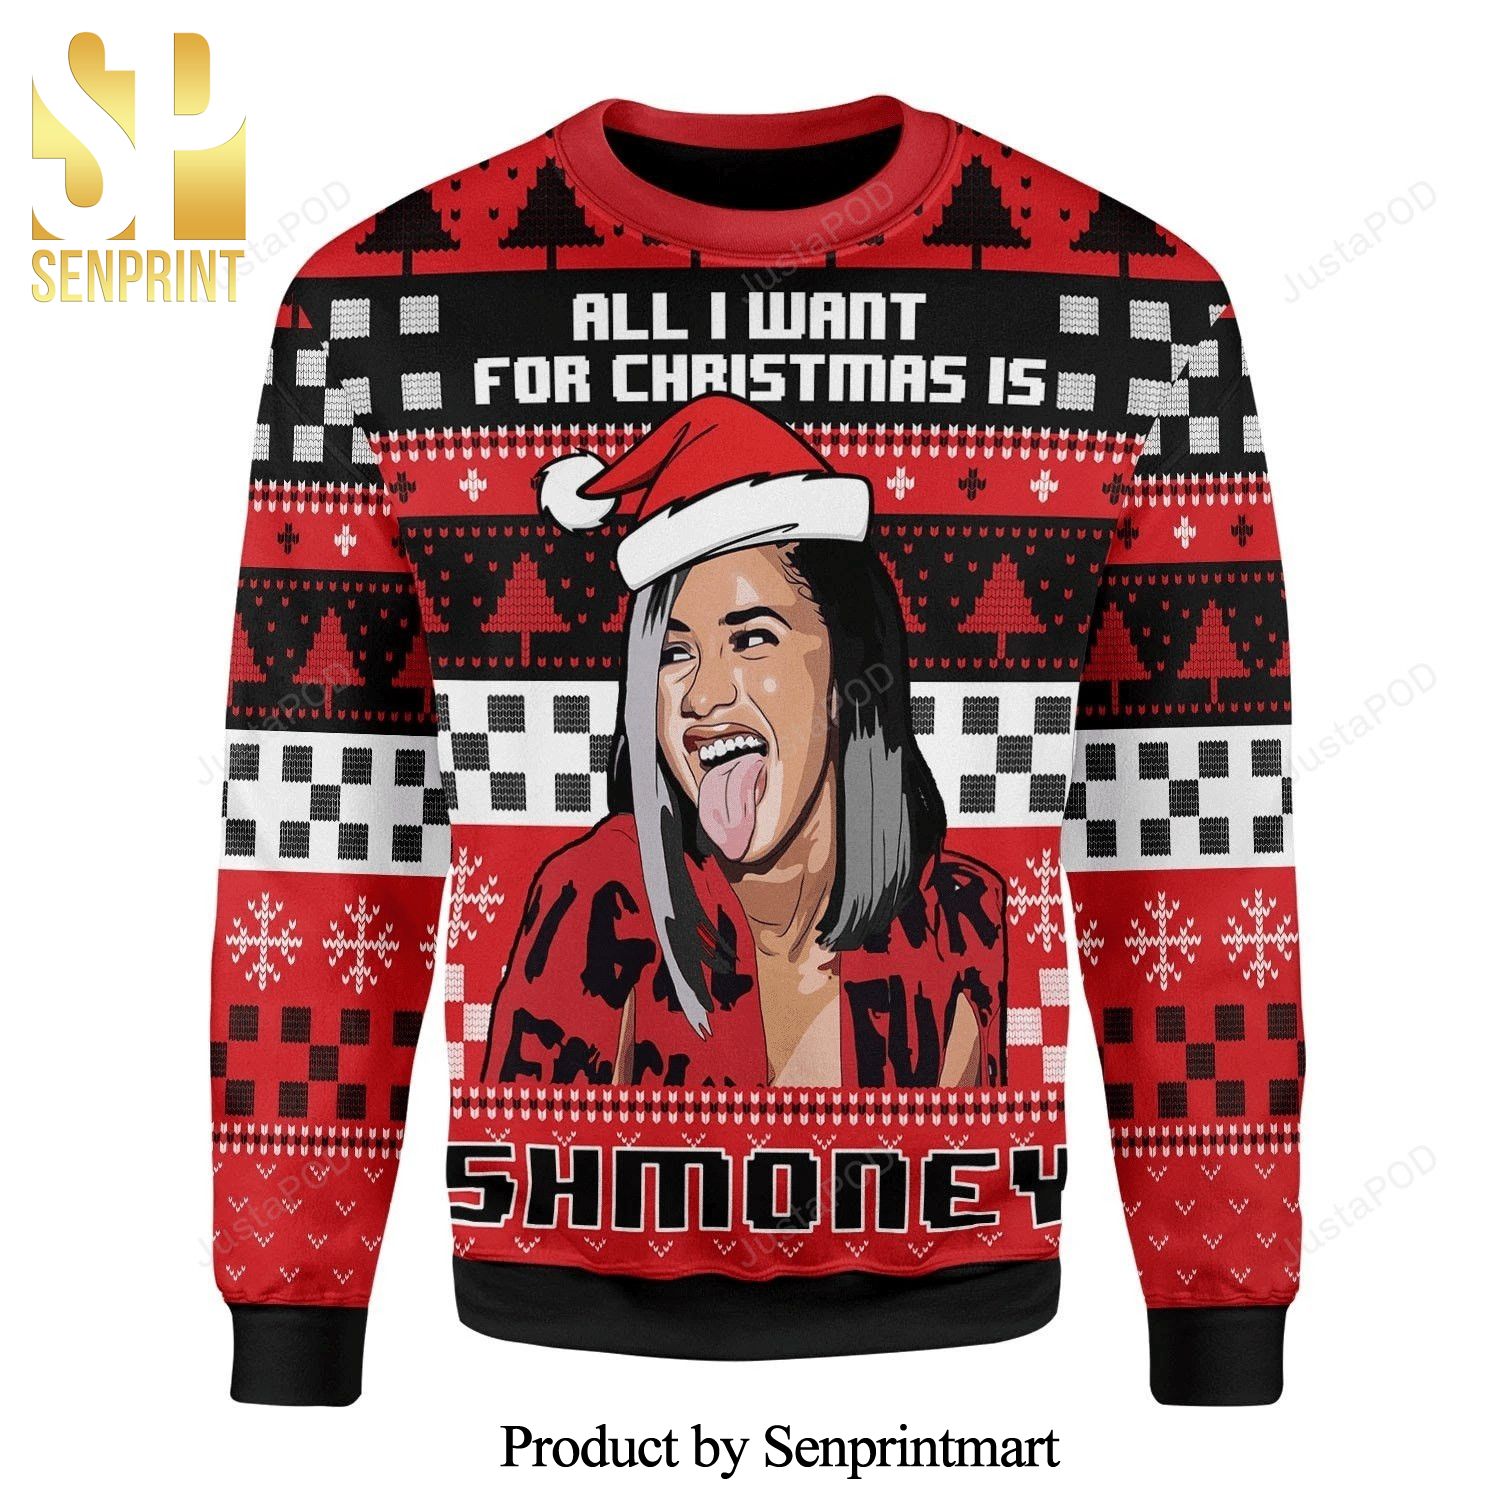 Cardi B All I Want For Christmas Is Some Money Knitted Ugly Christmas Sweater